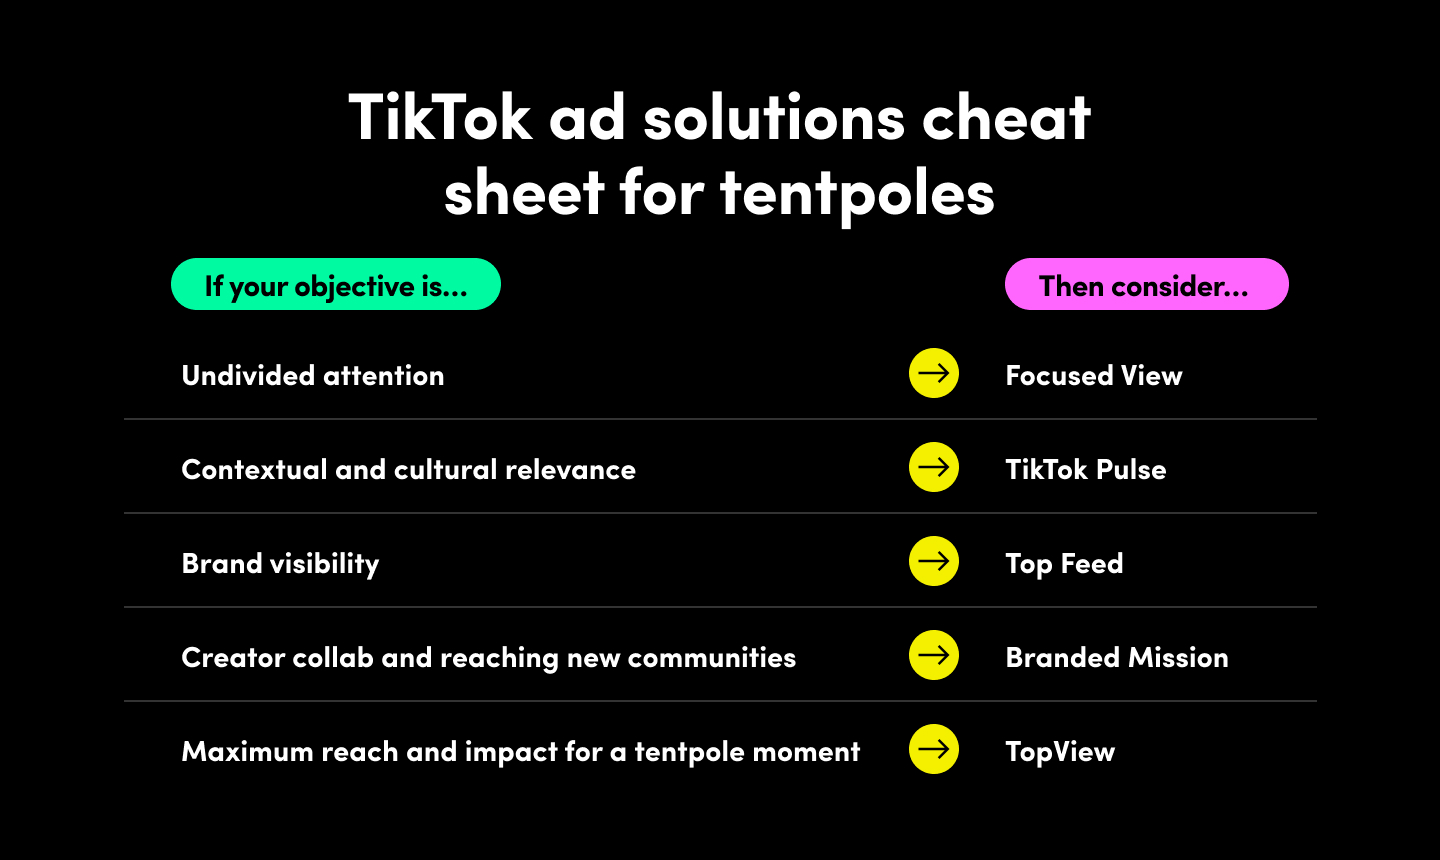 Cheat sheet: TikTok ad solutions for tentpole moments